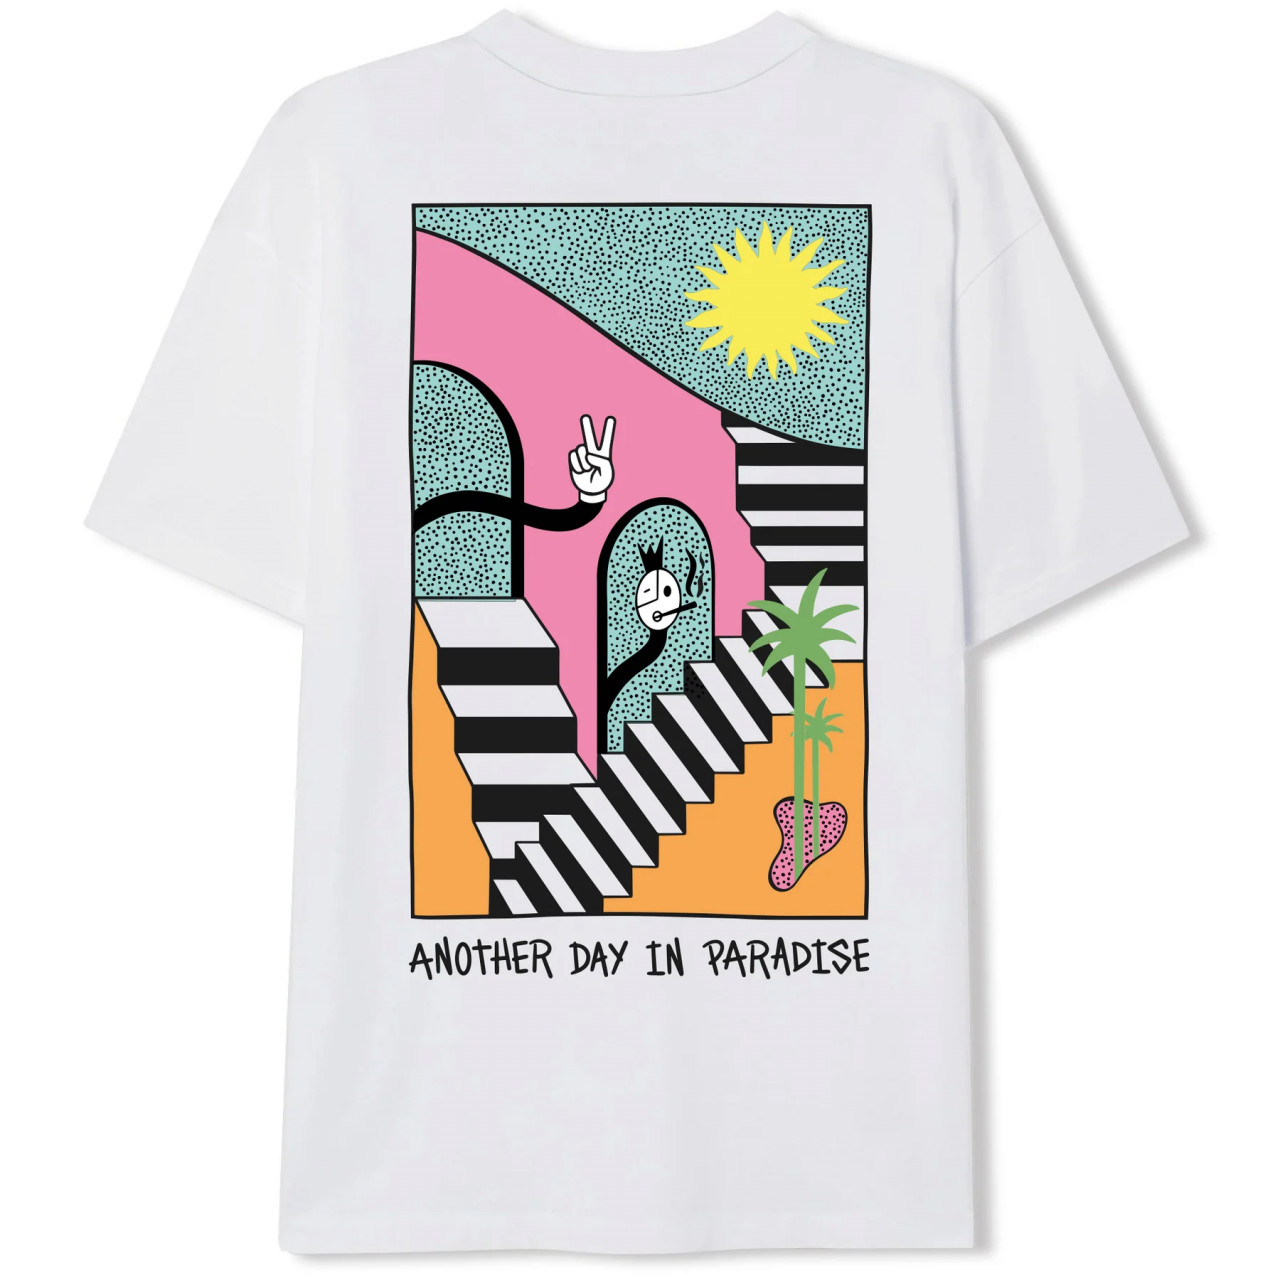 ANOTHER DAY IN PARADISE TEE